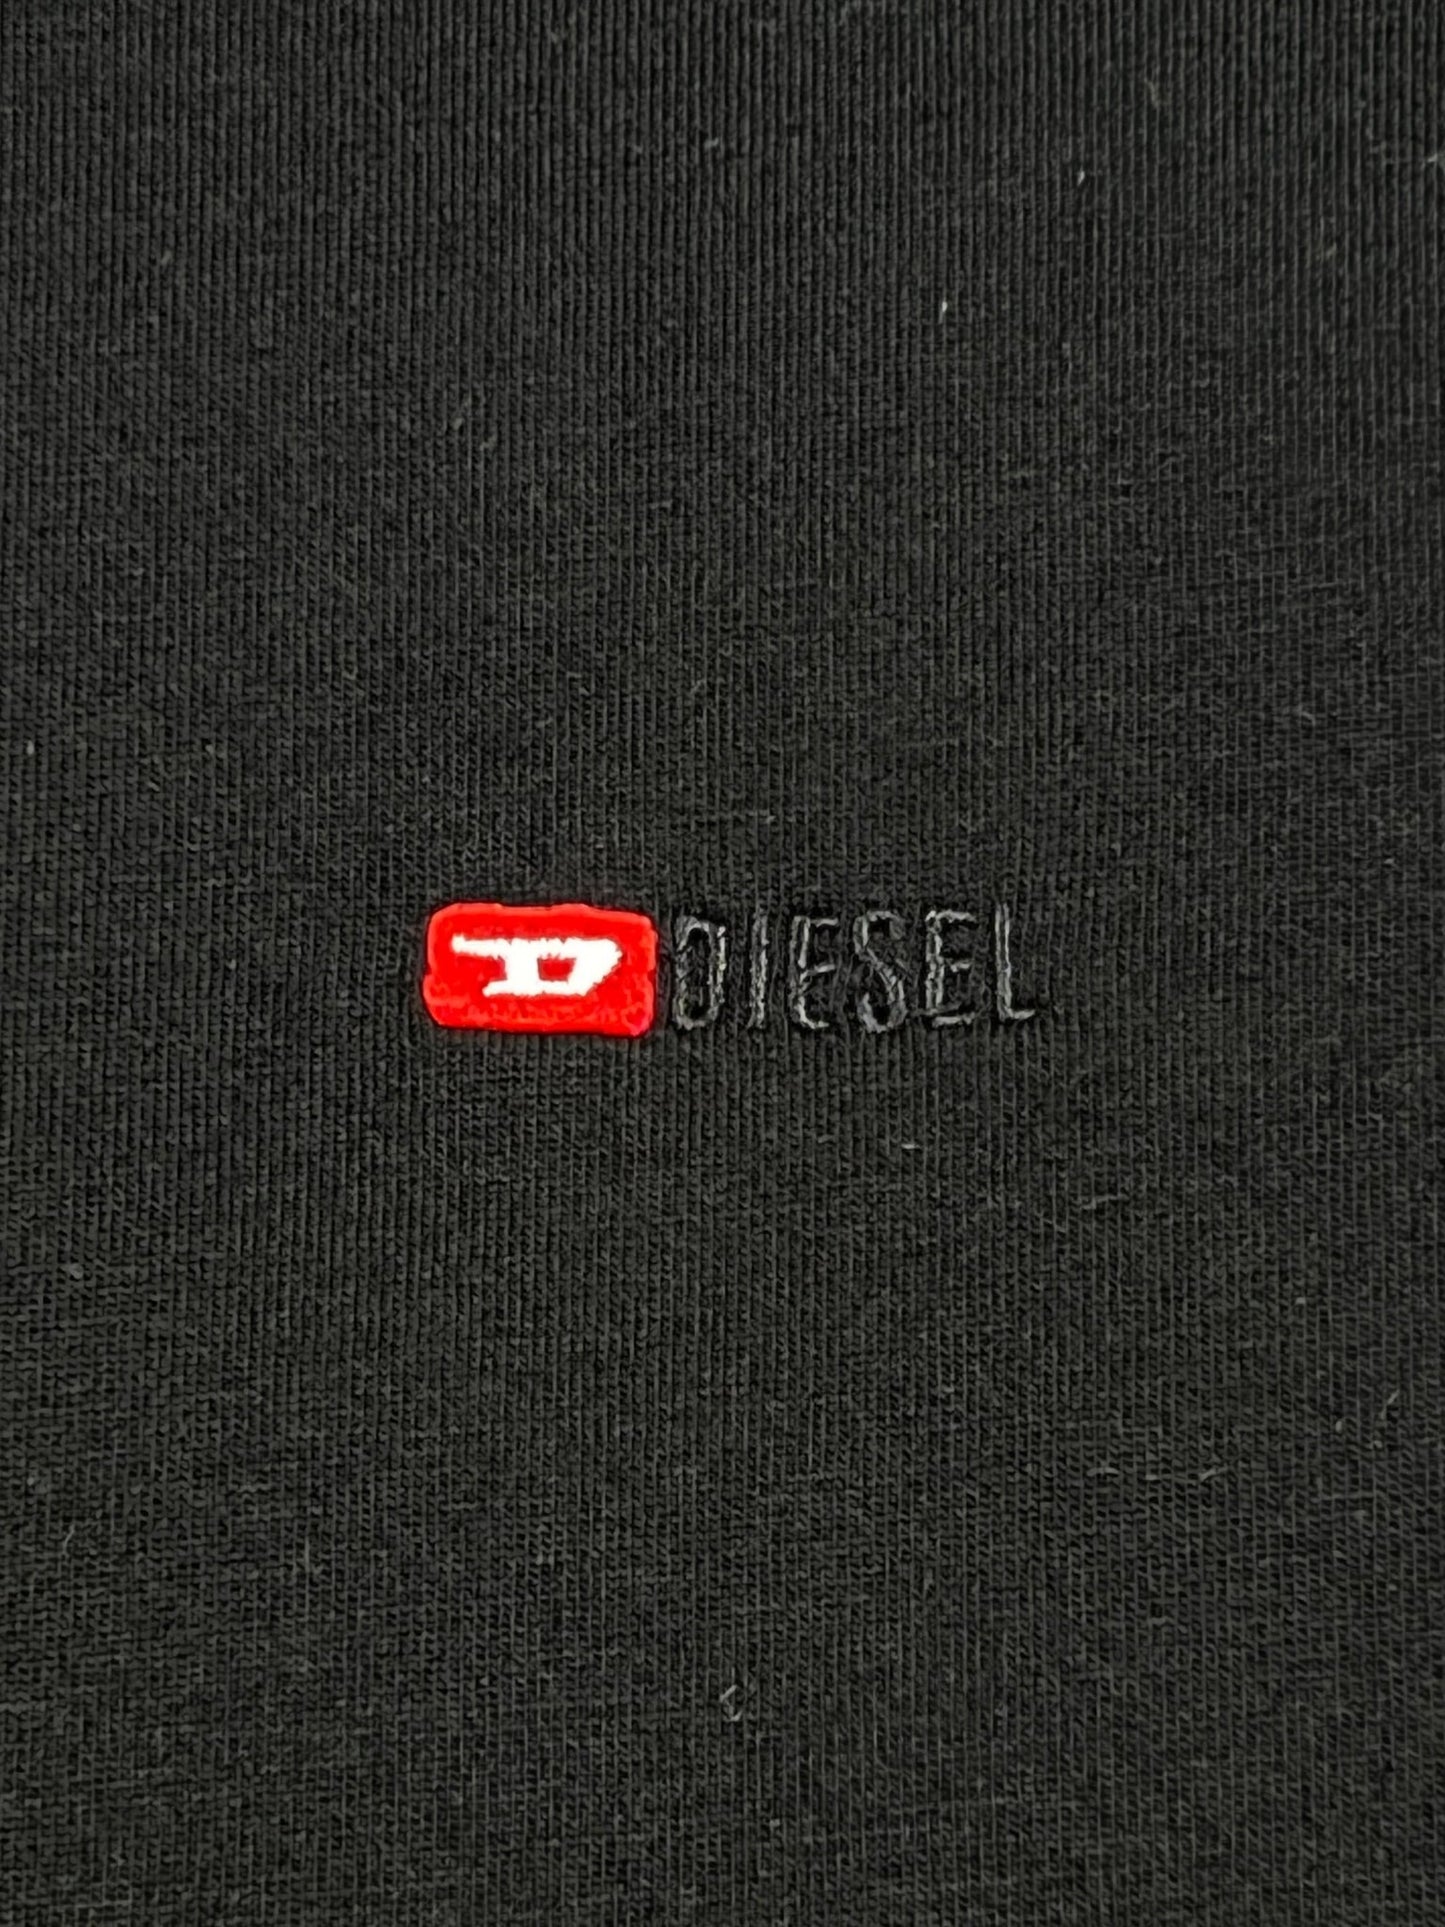 A close-up of a black cotton DIESEL T-JUST-MICRODIV T-SHIRT with the logo "Diesel" on it.